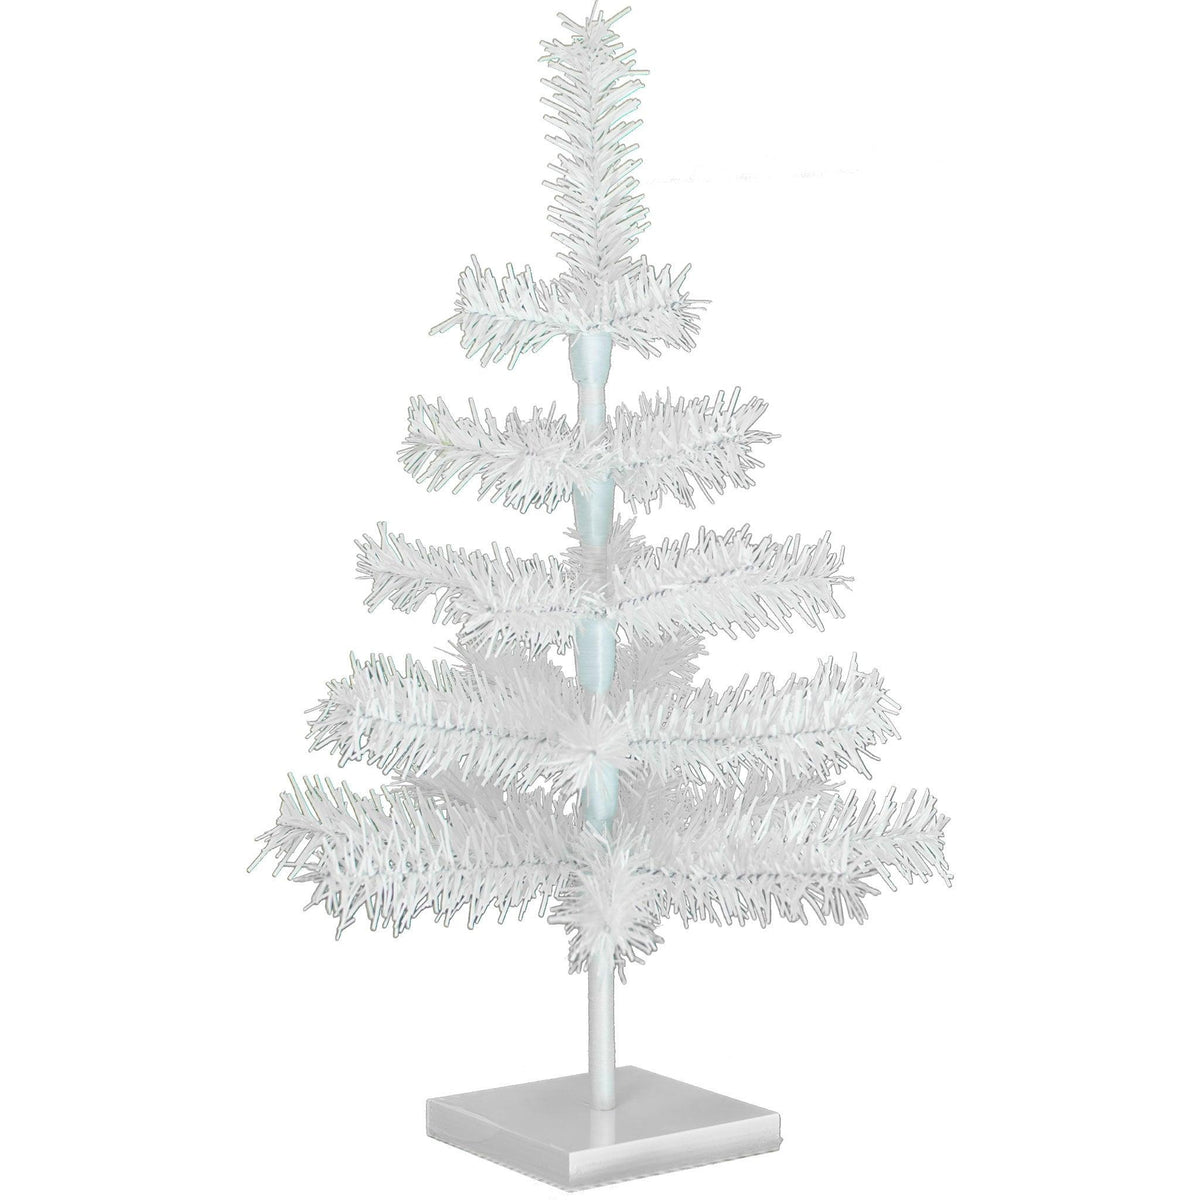 Lee Display | Shop White Tinsel Christmas Trees | Holiday Decor 18in